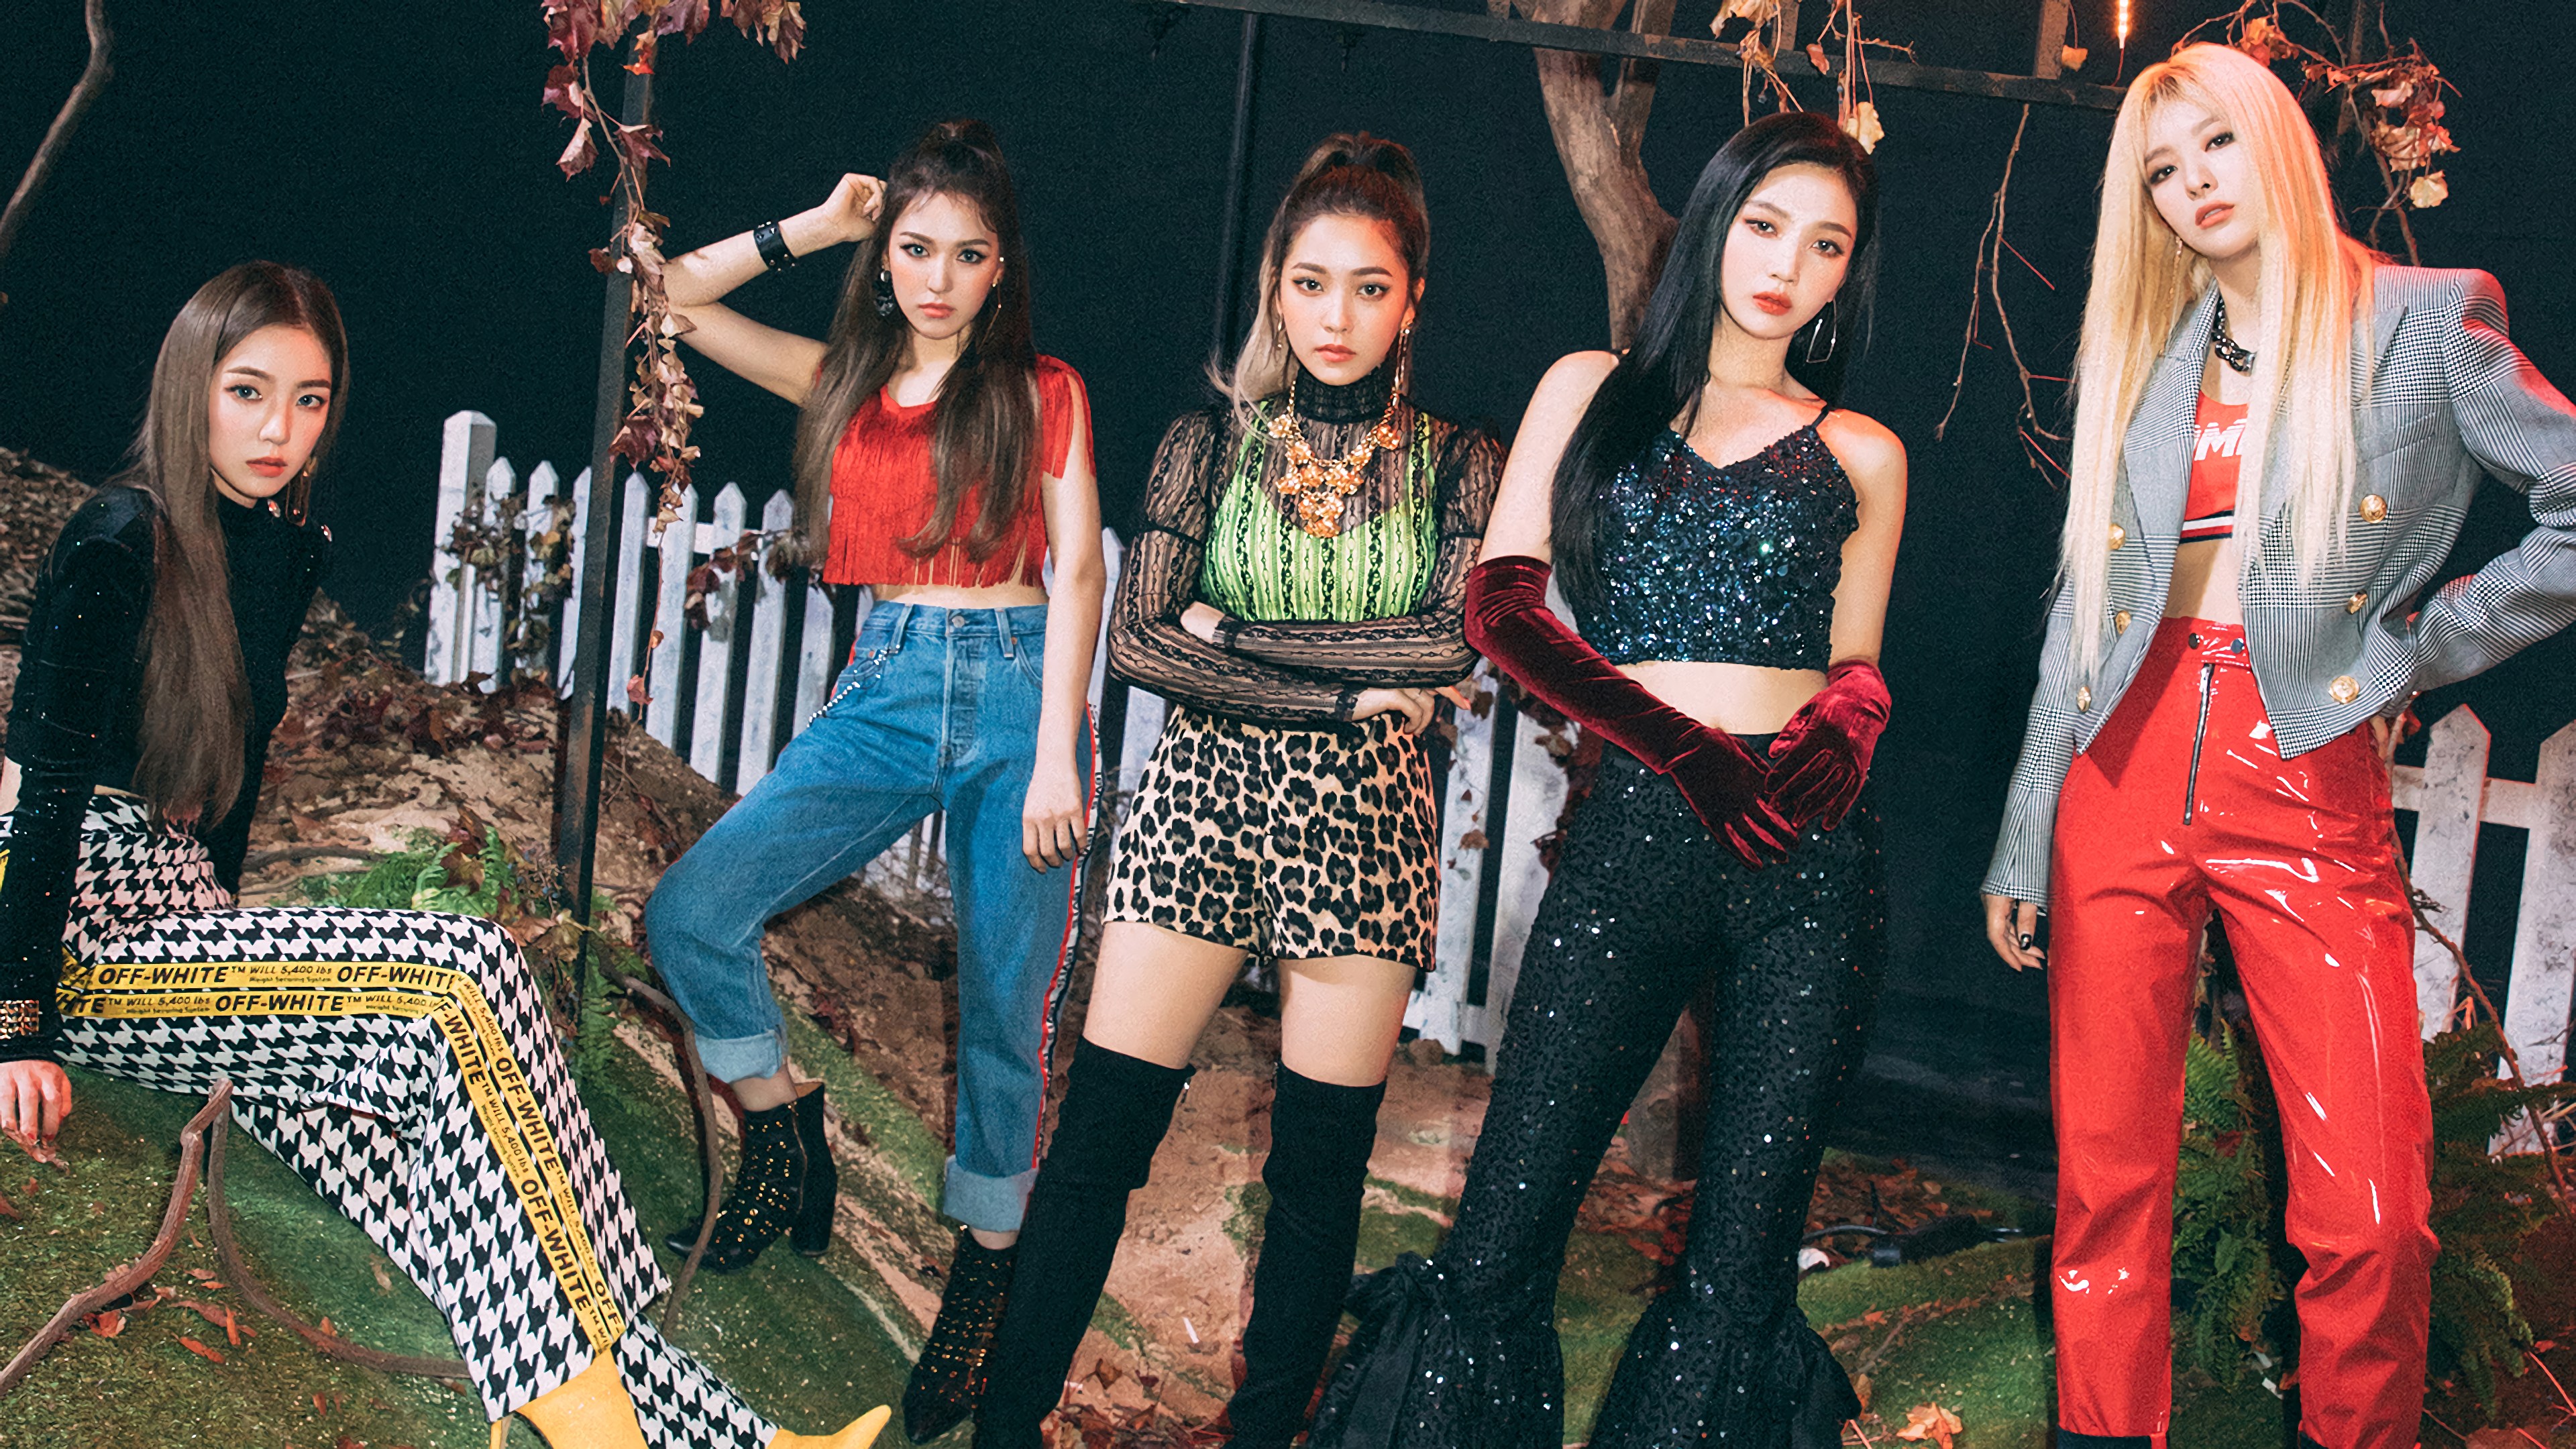 Red Velvet Really Bad Boy Outfits - 3840x2160 Wallpaper 